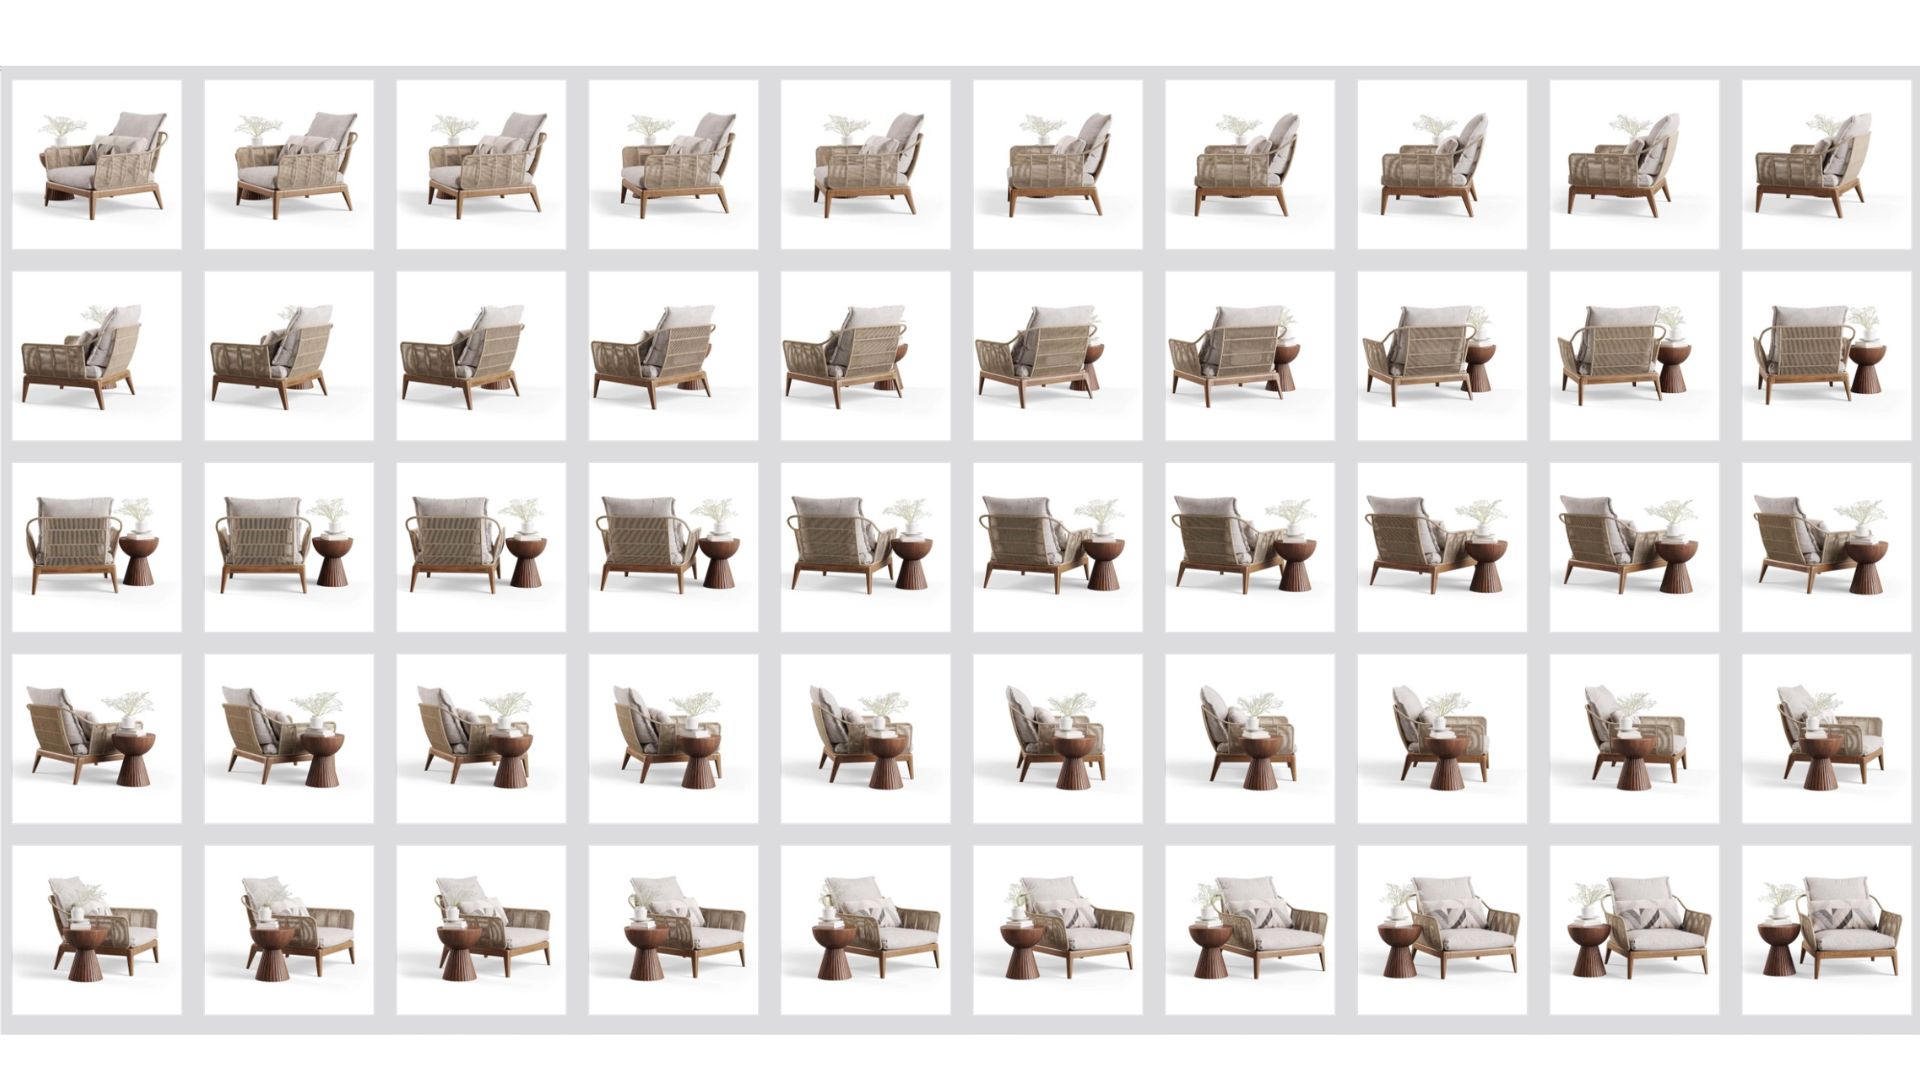 3D Interactive Product: 360-Degree View of an Arm Chair